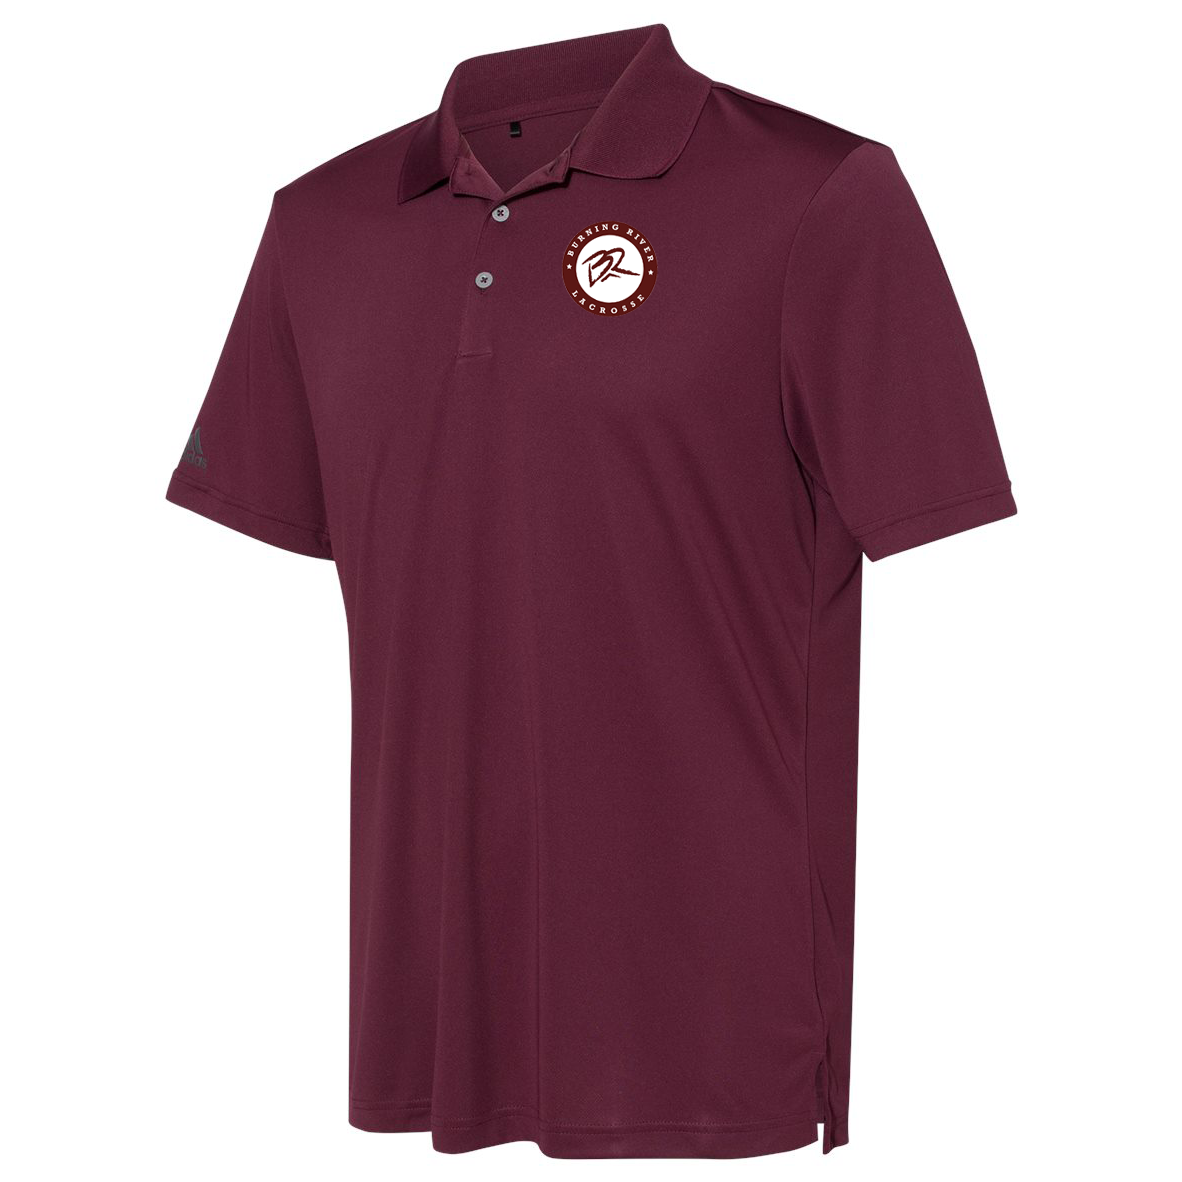 Burning River Lacrosse Coach's Adidas Performance Sport Polo